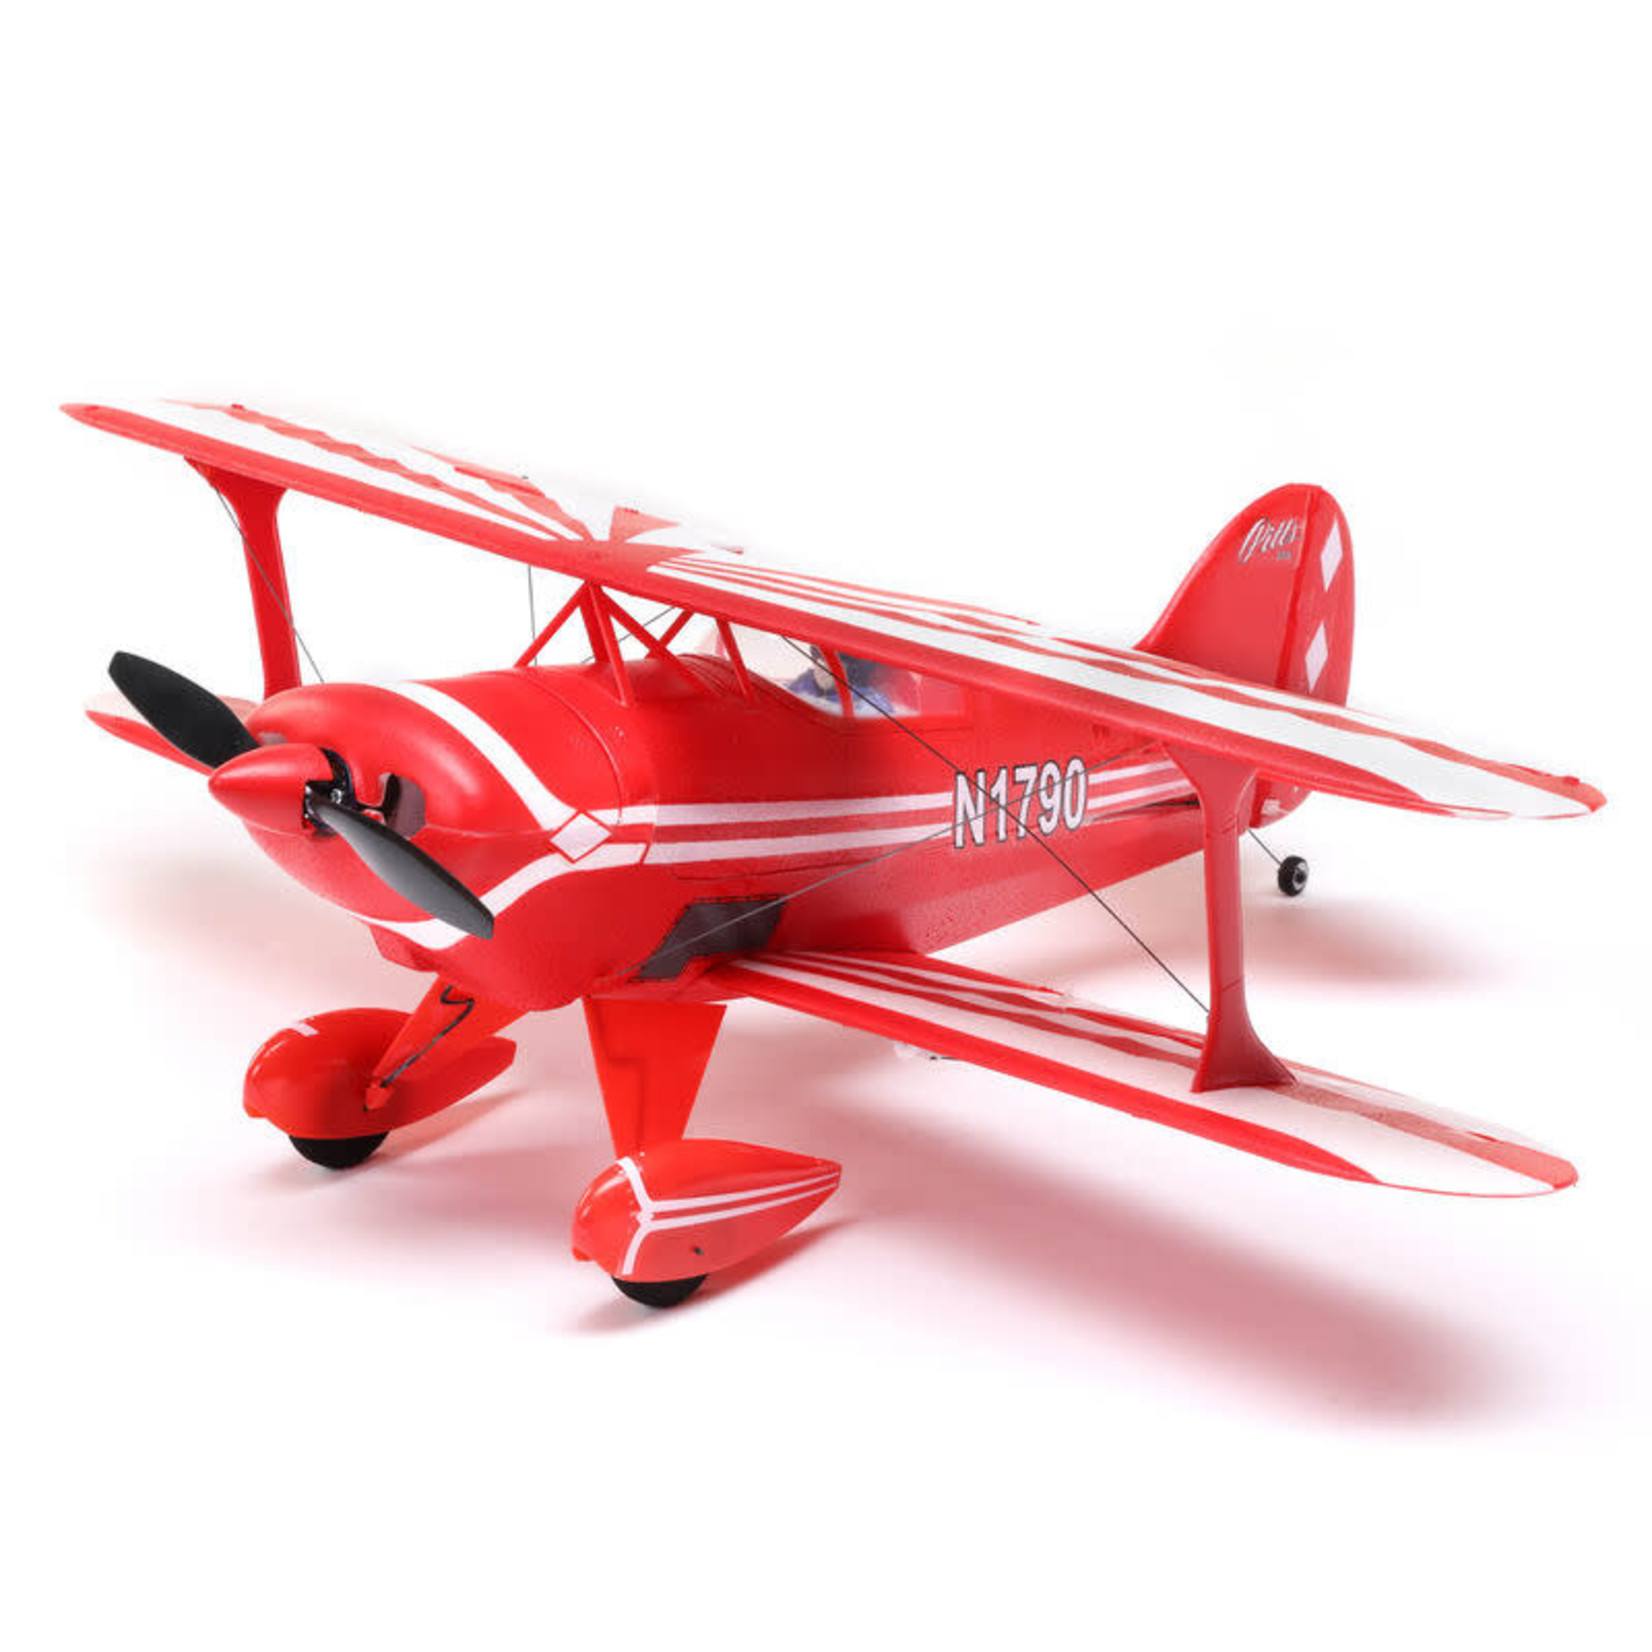 E-Flite EFLU15250 E-flite UMX Pitts S-1S BNF Basic  with AS3X and SAFE Select